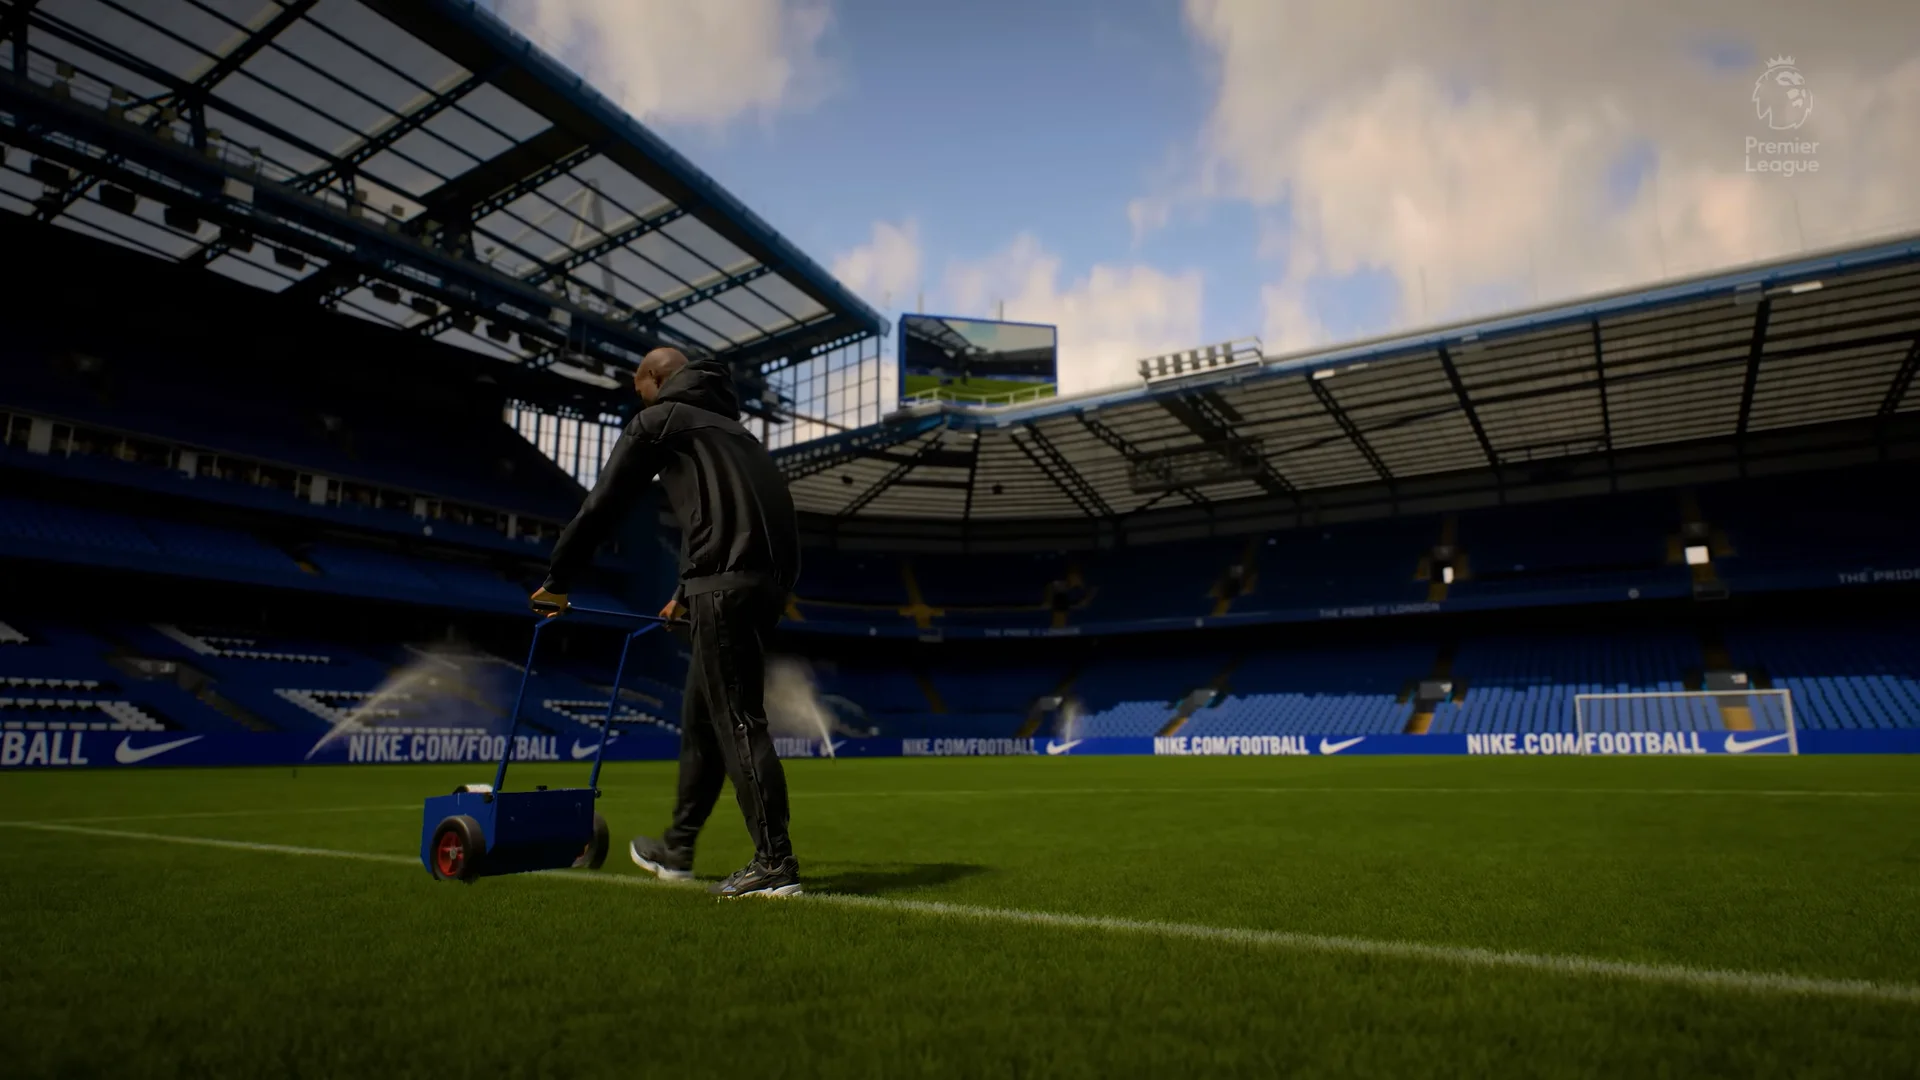 Fifa 23 review – EA's final Fifa game bows out gracefully